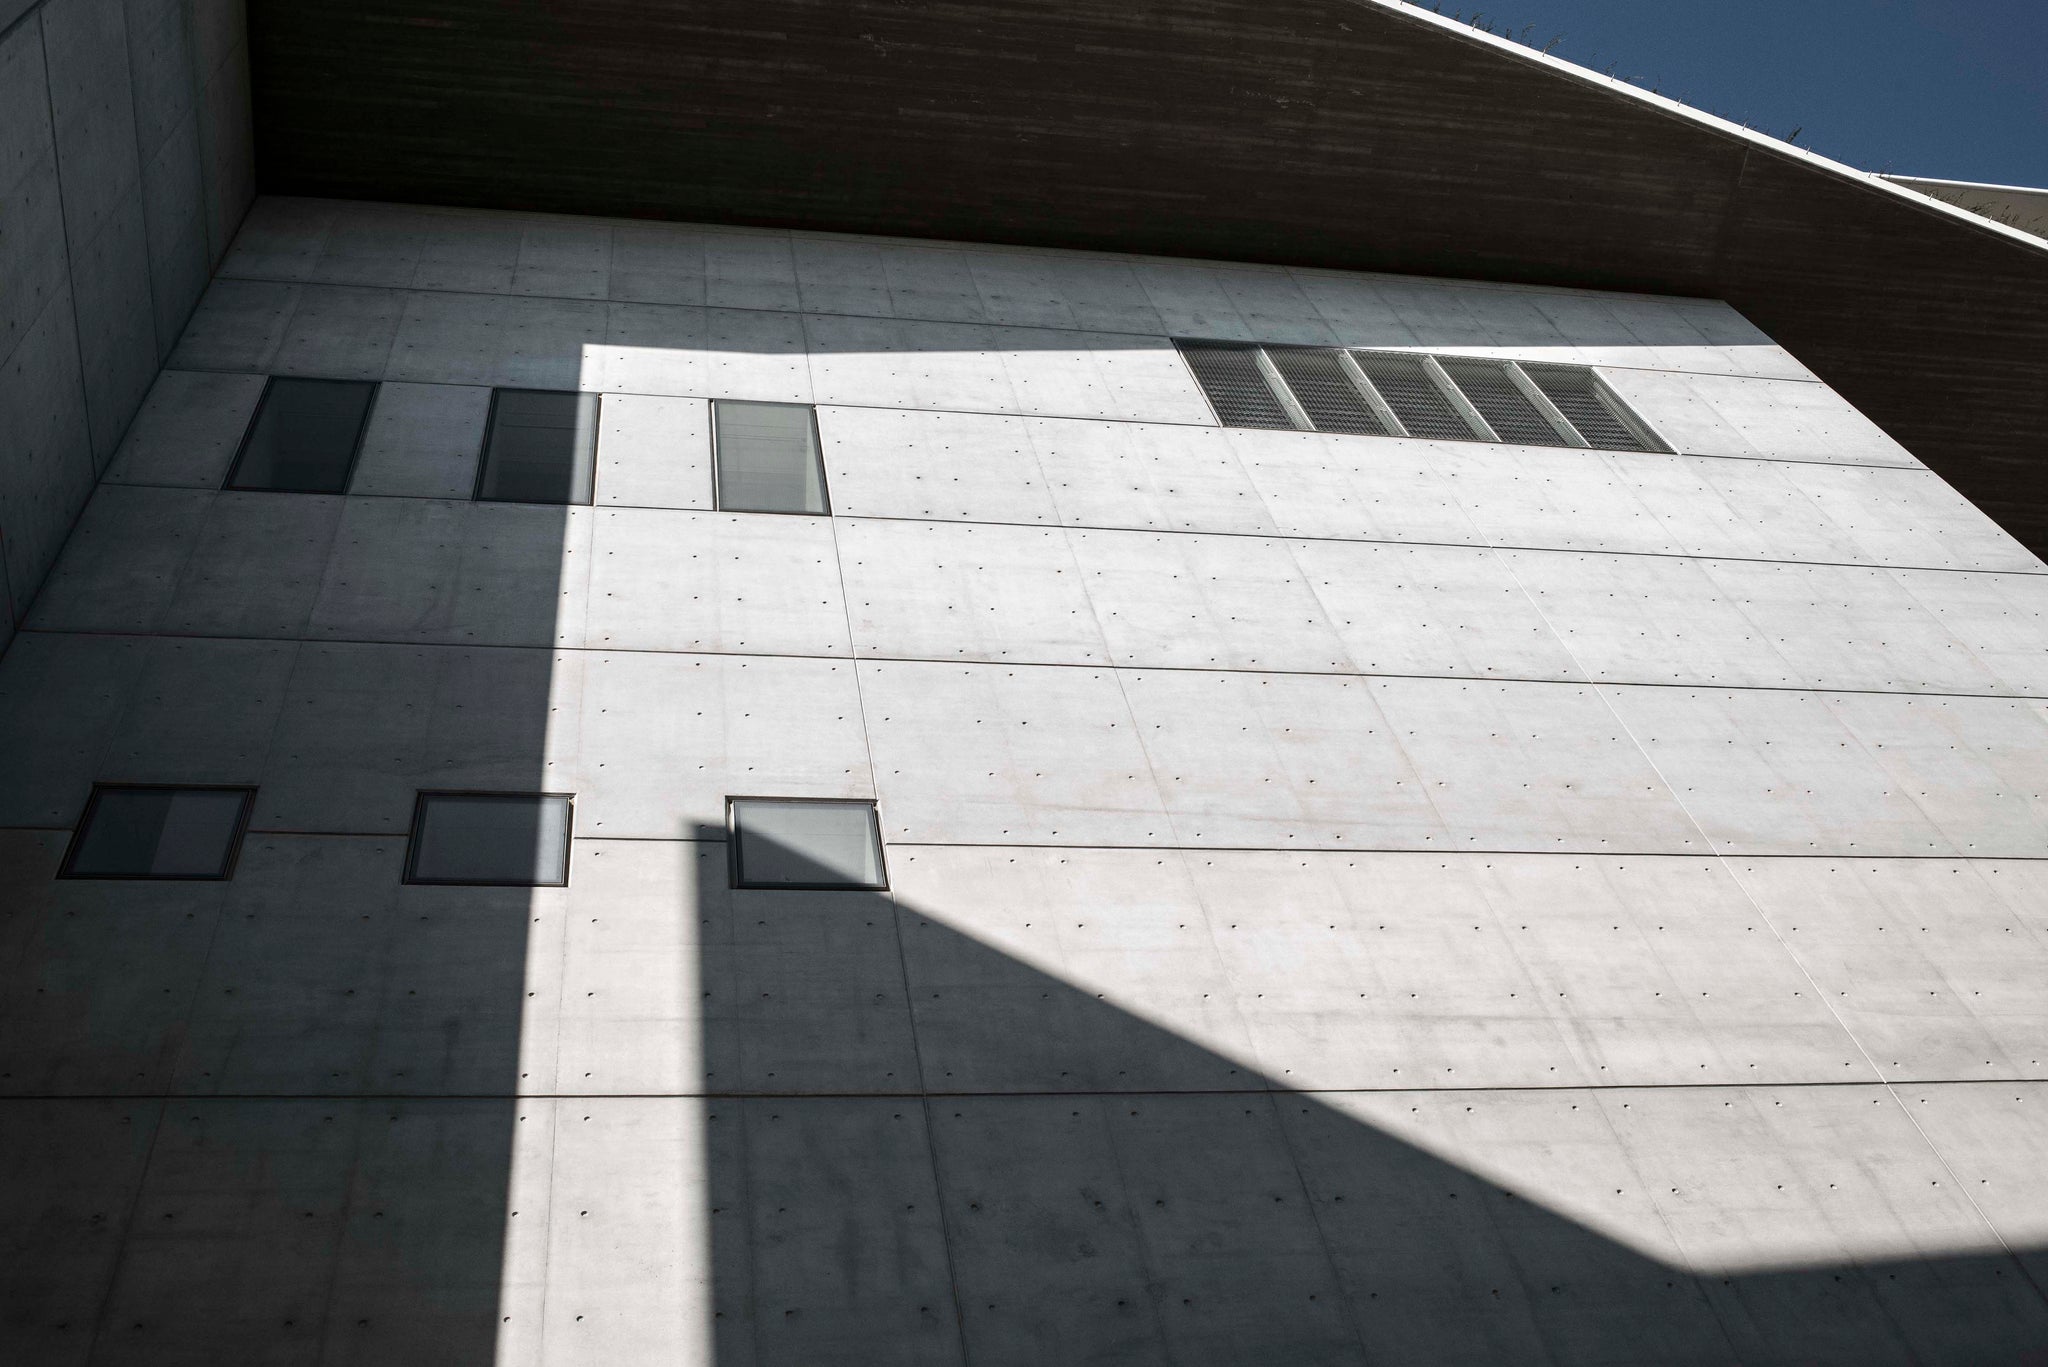 Stavros Niarchos Foundation in shadow and light